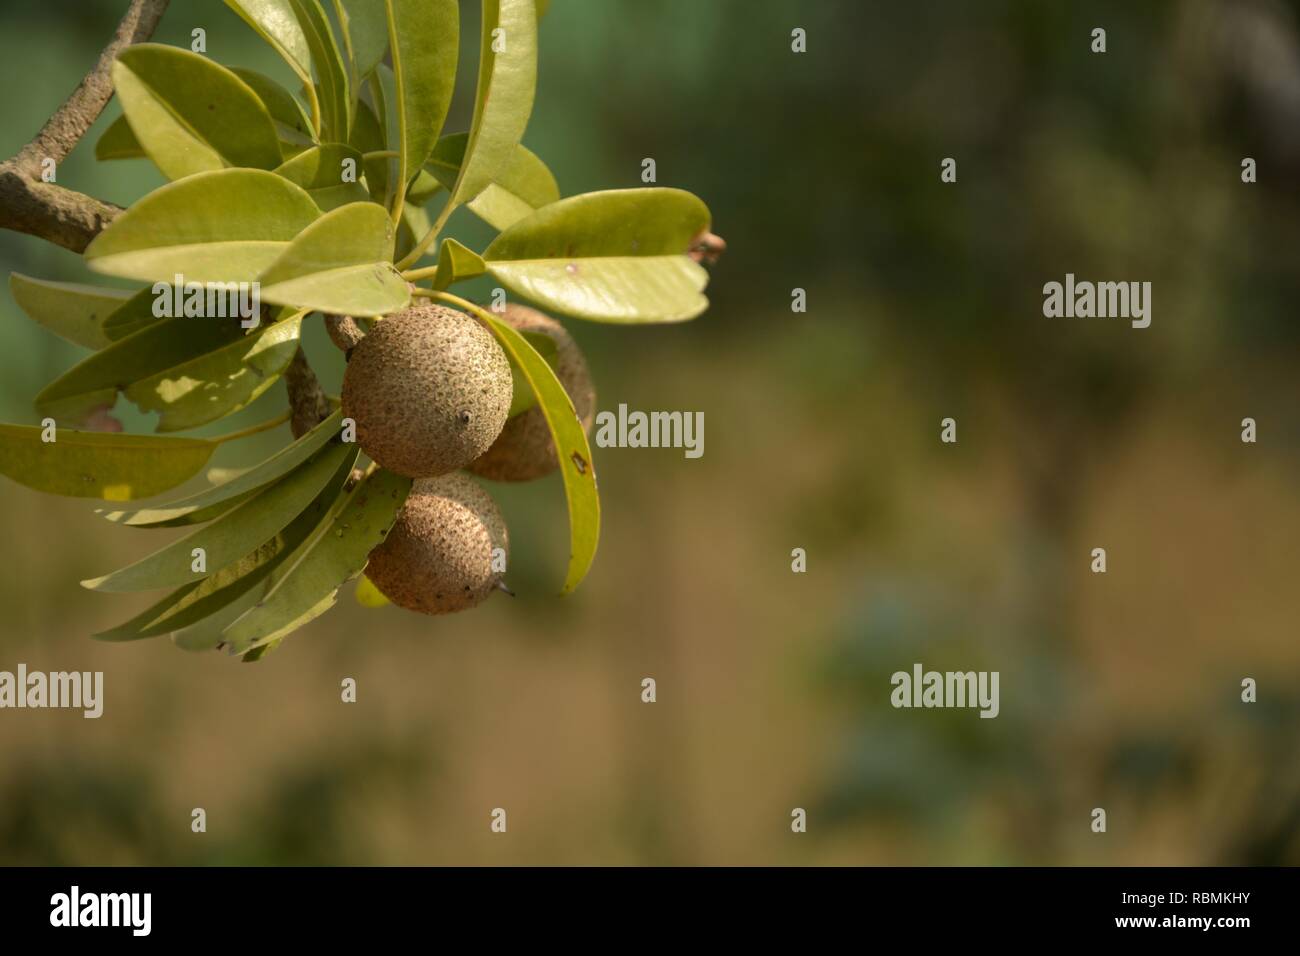 Some beautiful  small Manilkara zapota, commonly known as sapodilla or chikoo with green leaves growing in the plant in garden with blur background Stock Photo